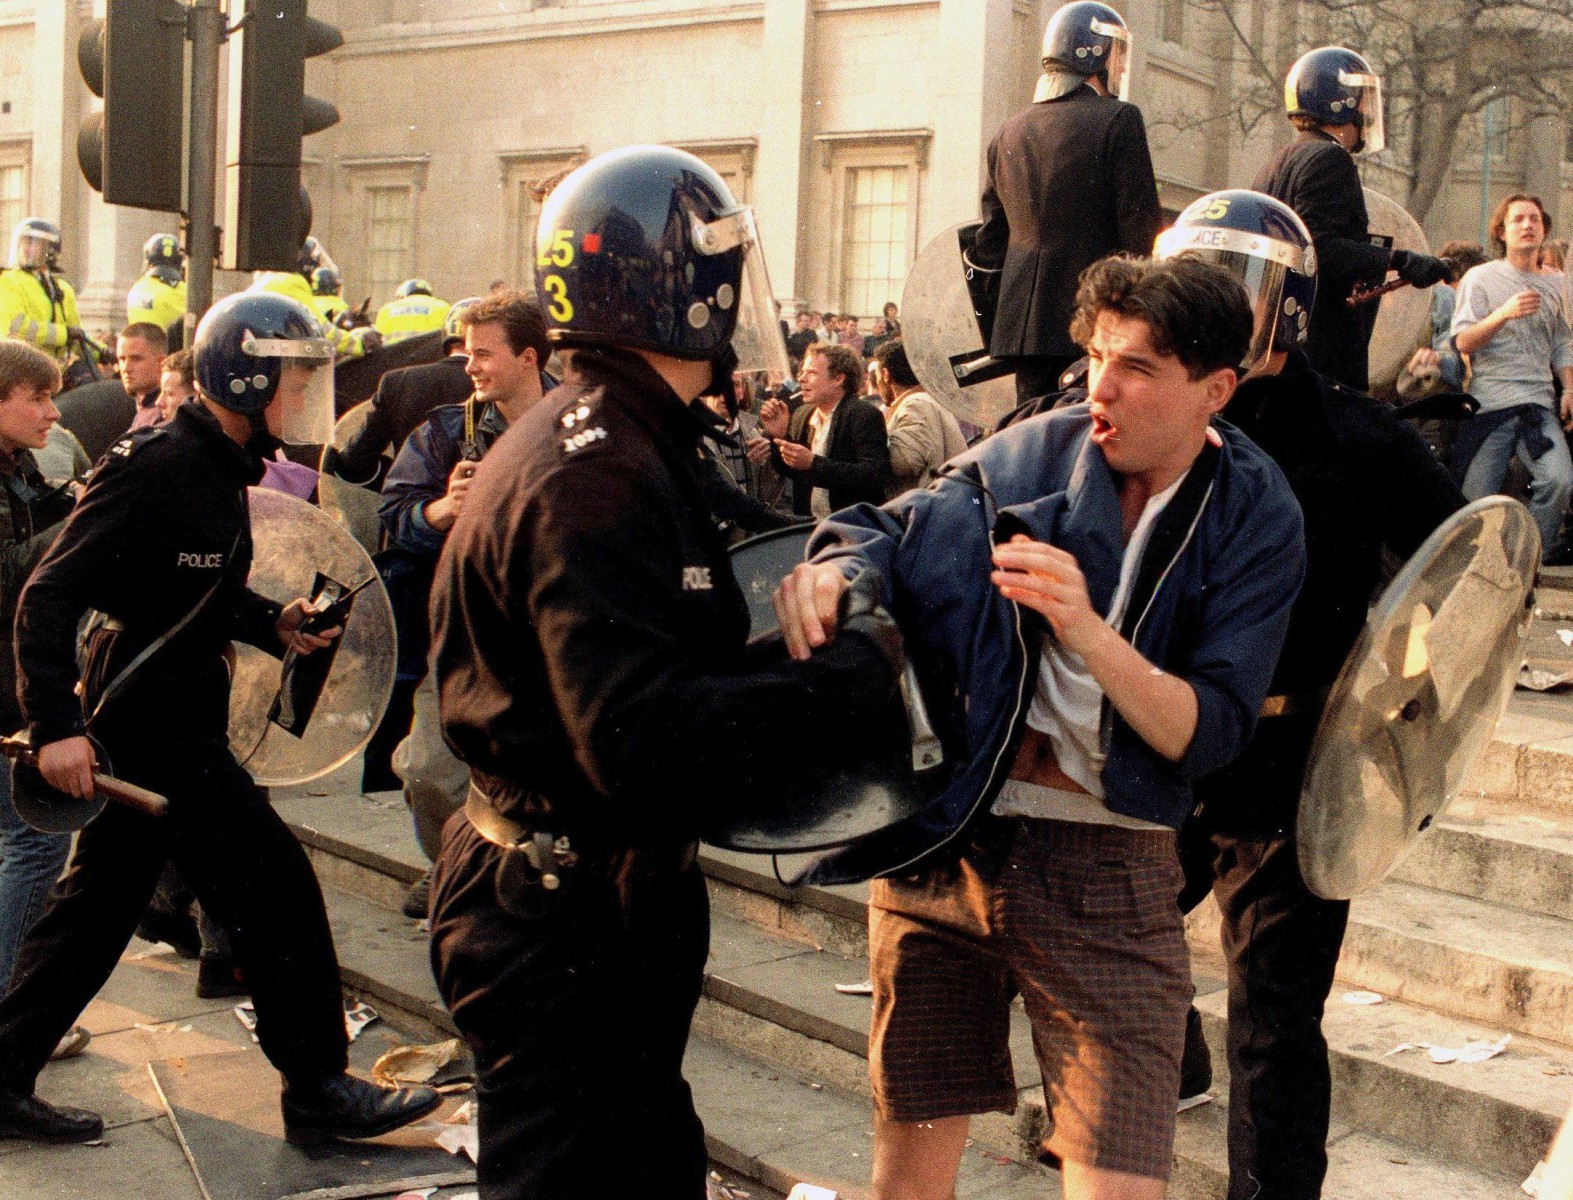 Letwin was the genius who dreamed upthe poll tax, that theoretically pure but hopelessly impractical local-tax policy that toppled Mrs Thatcher and managed to get the normally placid British people to riot in Trafalgar Square